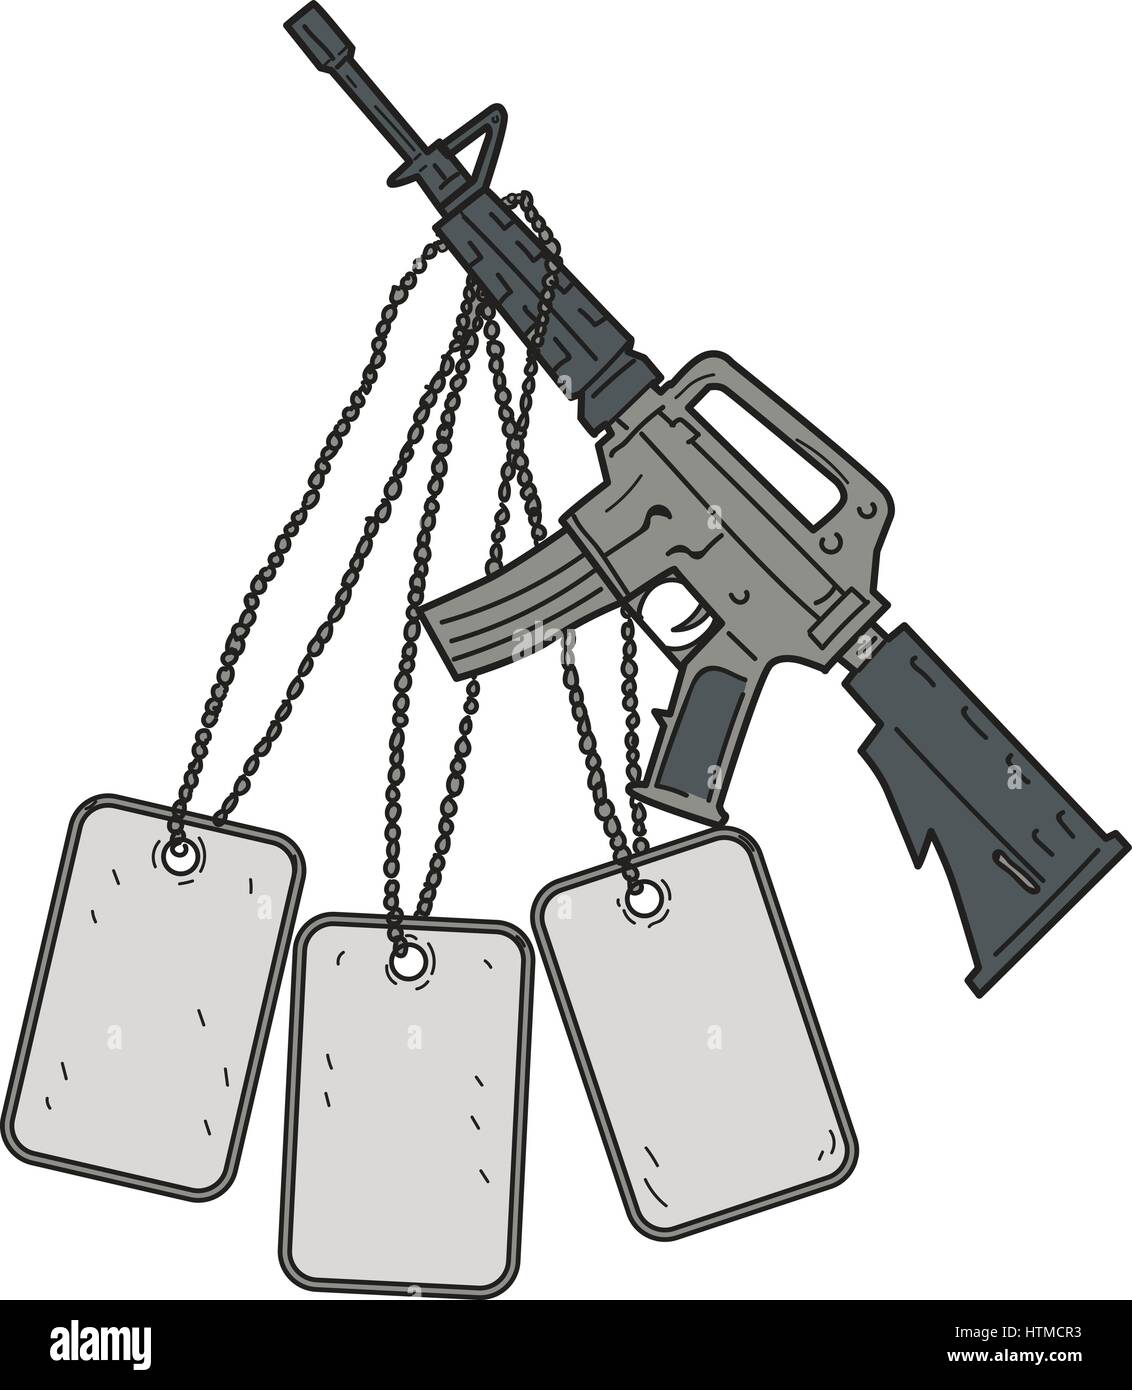 Drawing sketch style illustration of an  M4, an air-cooled, direct impingement gas-operated, magazine-fed carbine used by United States Army and US Ma Stock Vector